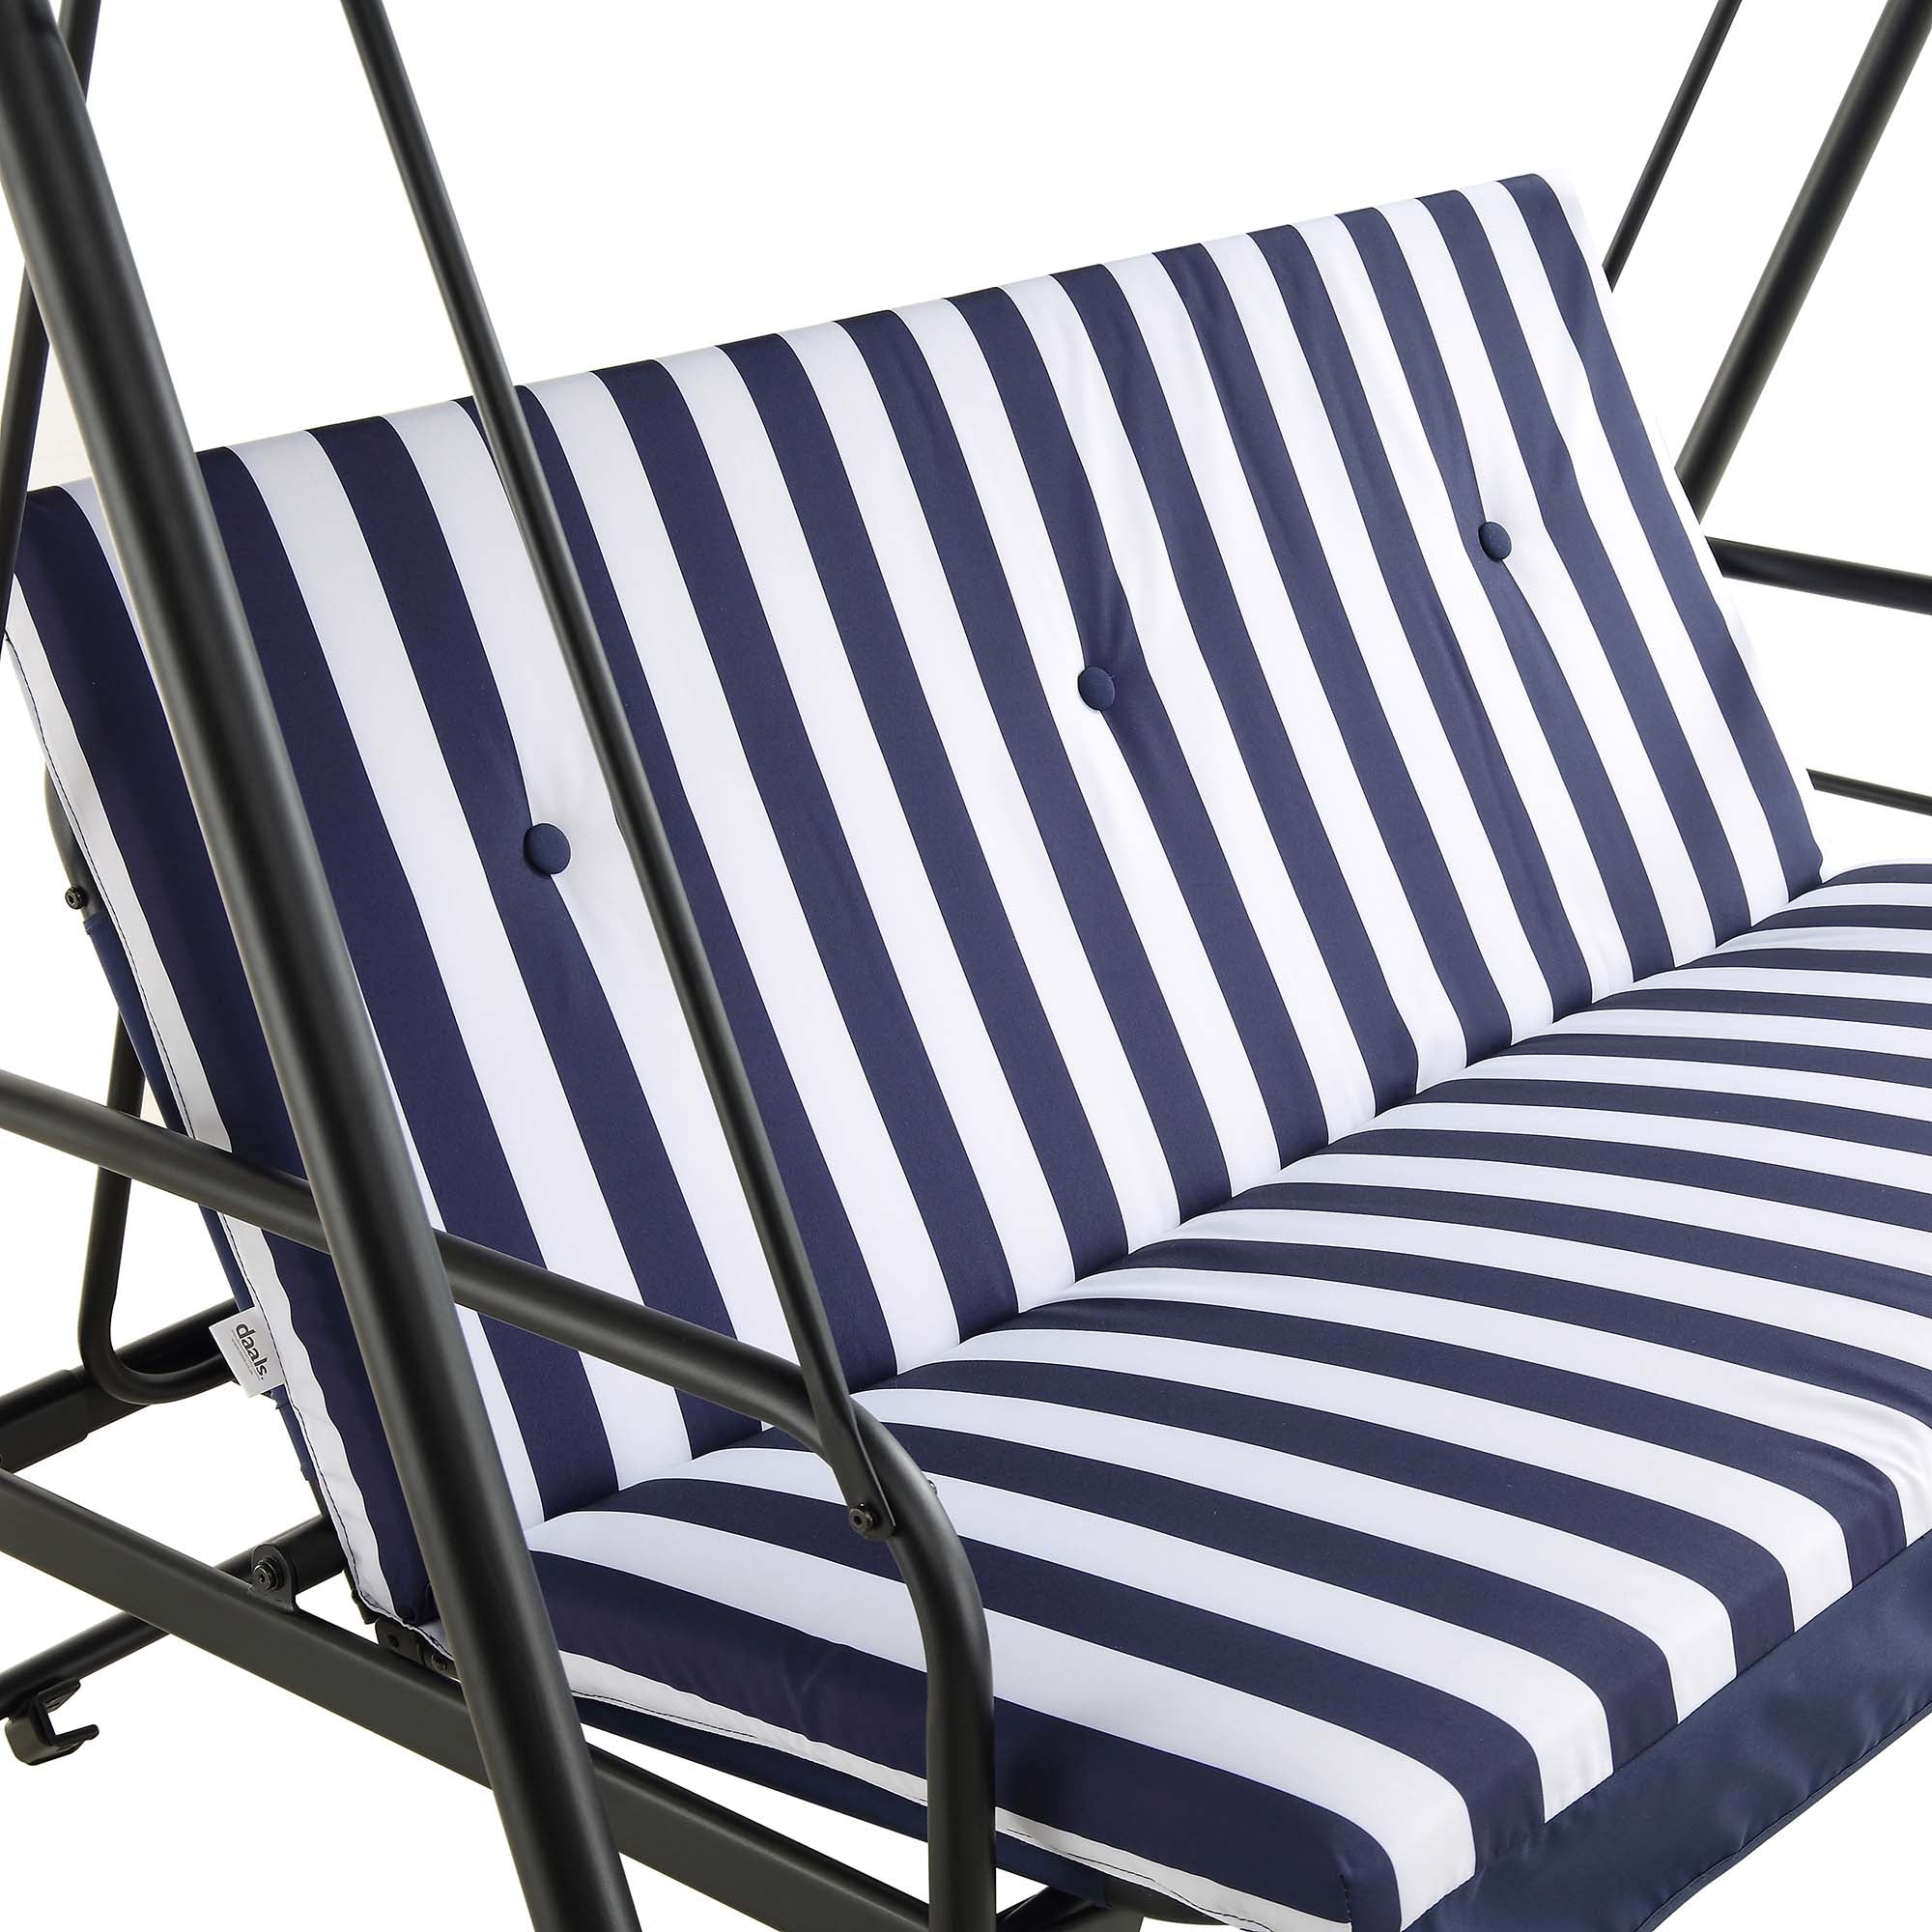 Champneys Outdoor Reclining Swing with Canopy, Blue Striped